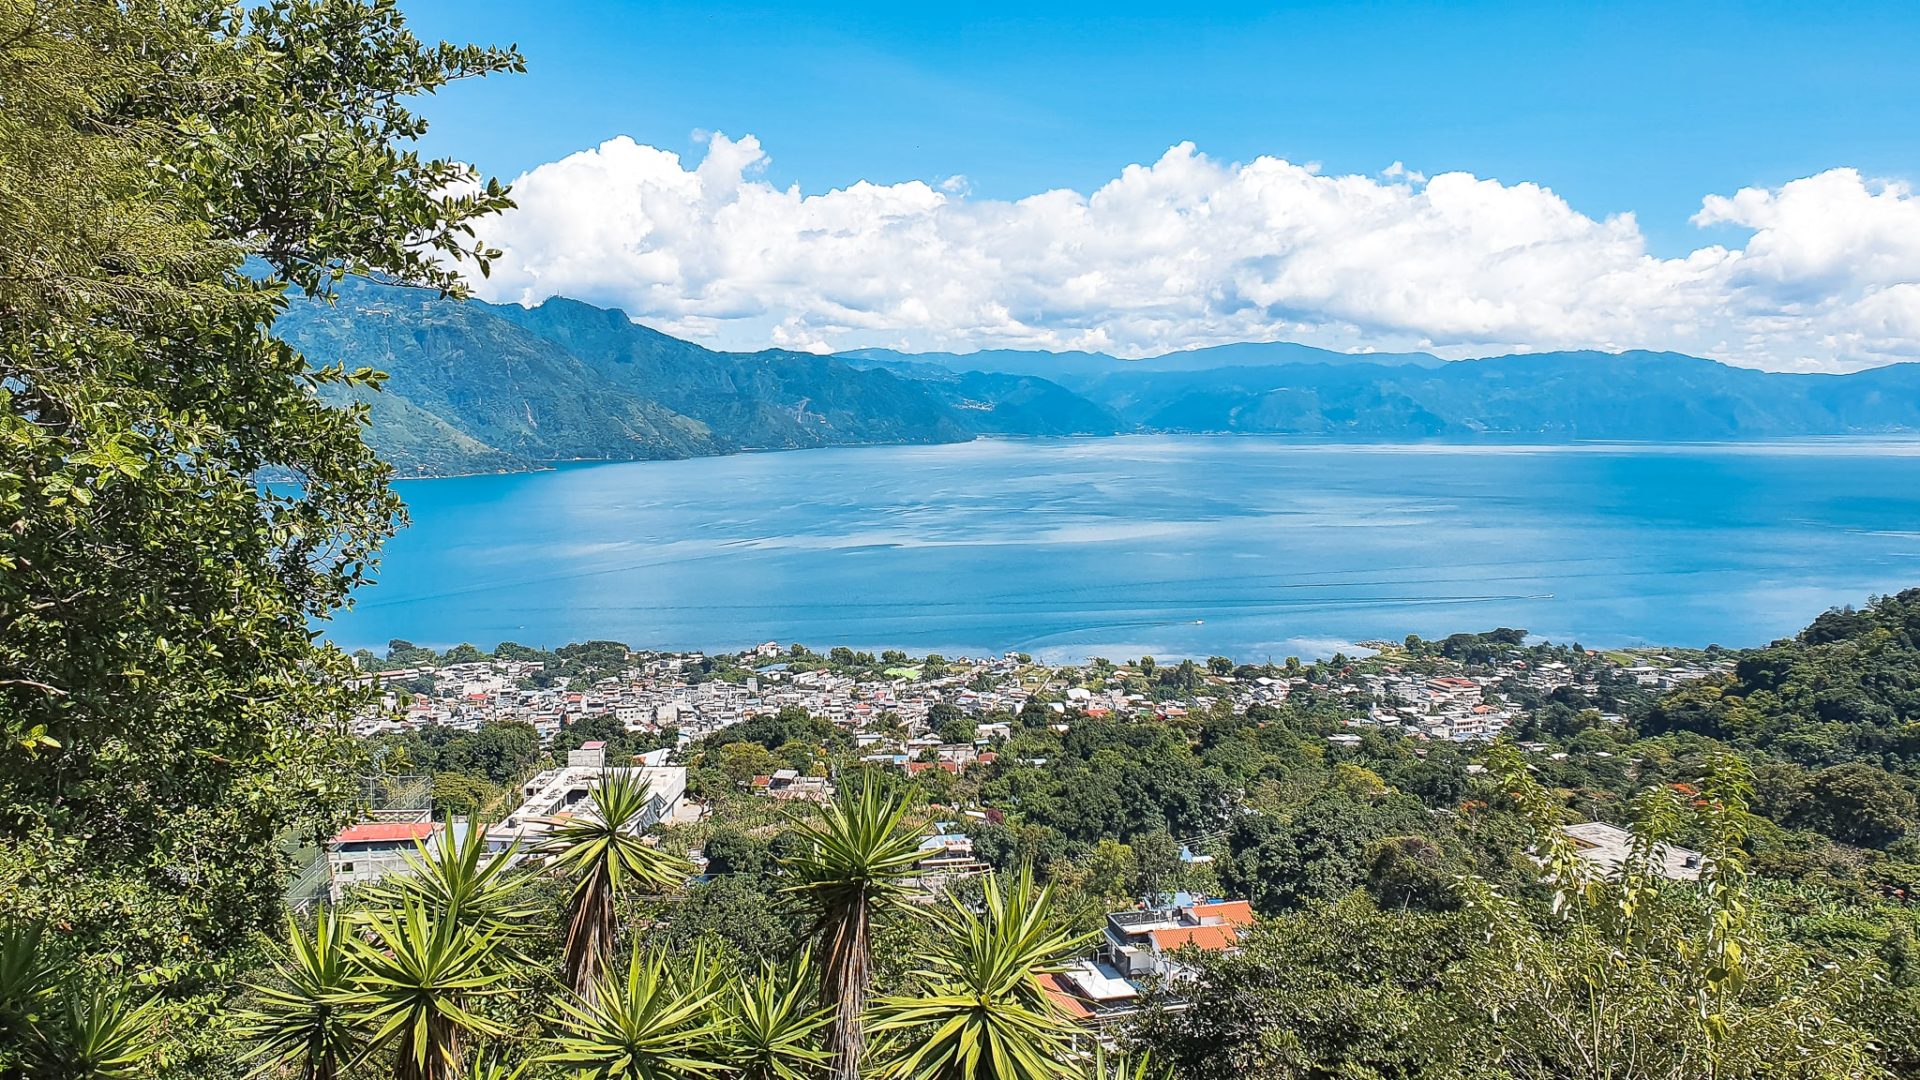 The Most Charming Villages on Lake Atitlán, Guatemala » Travel with new ...